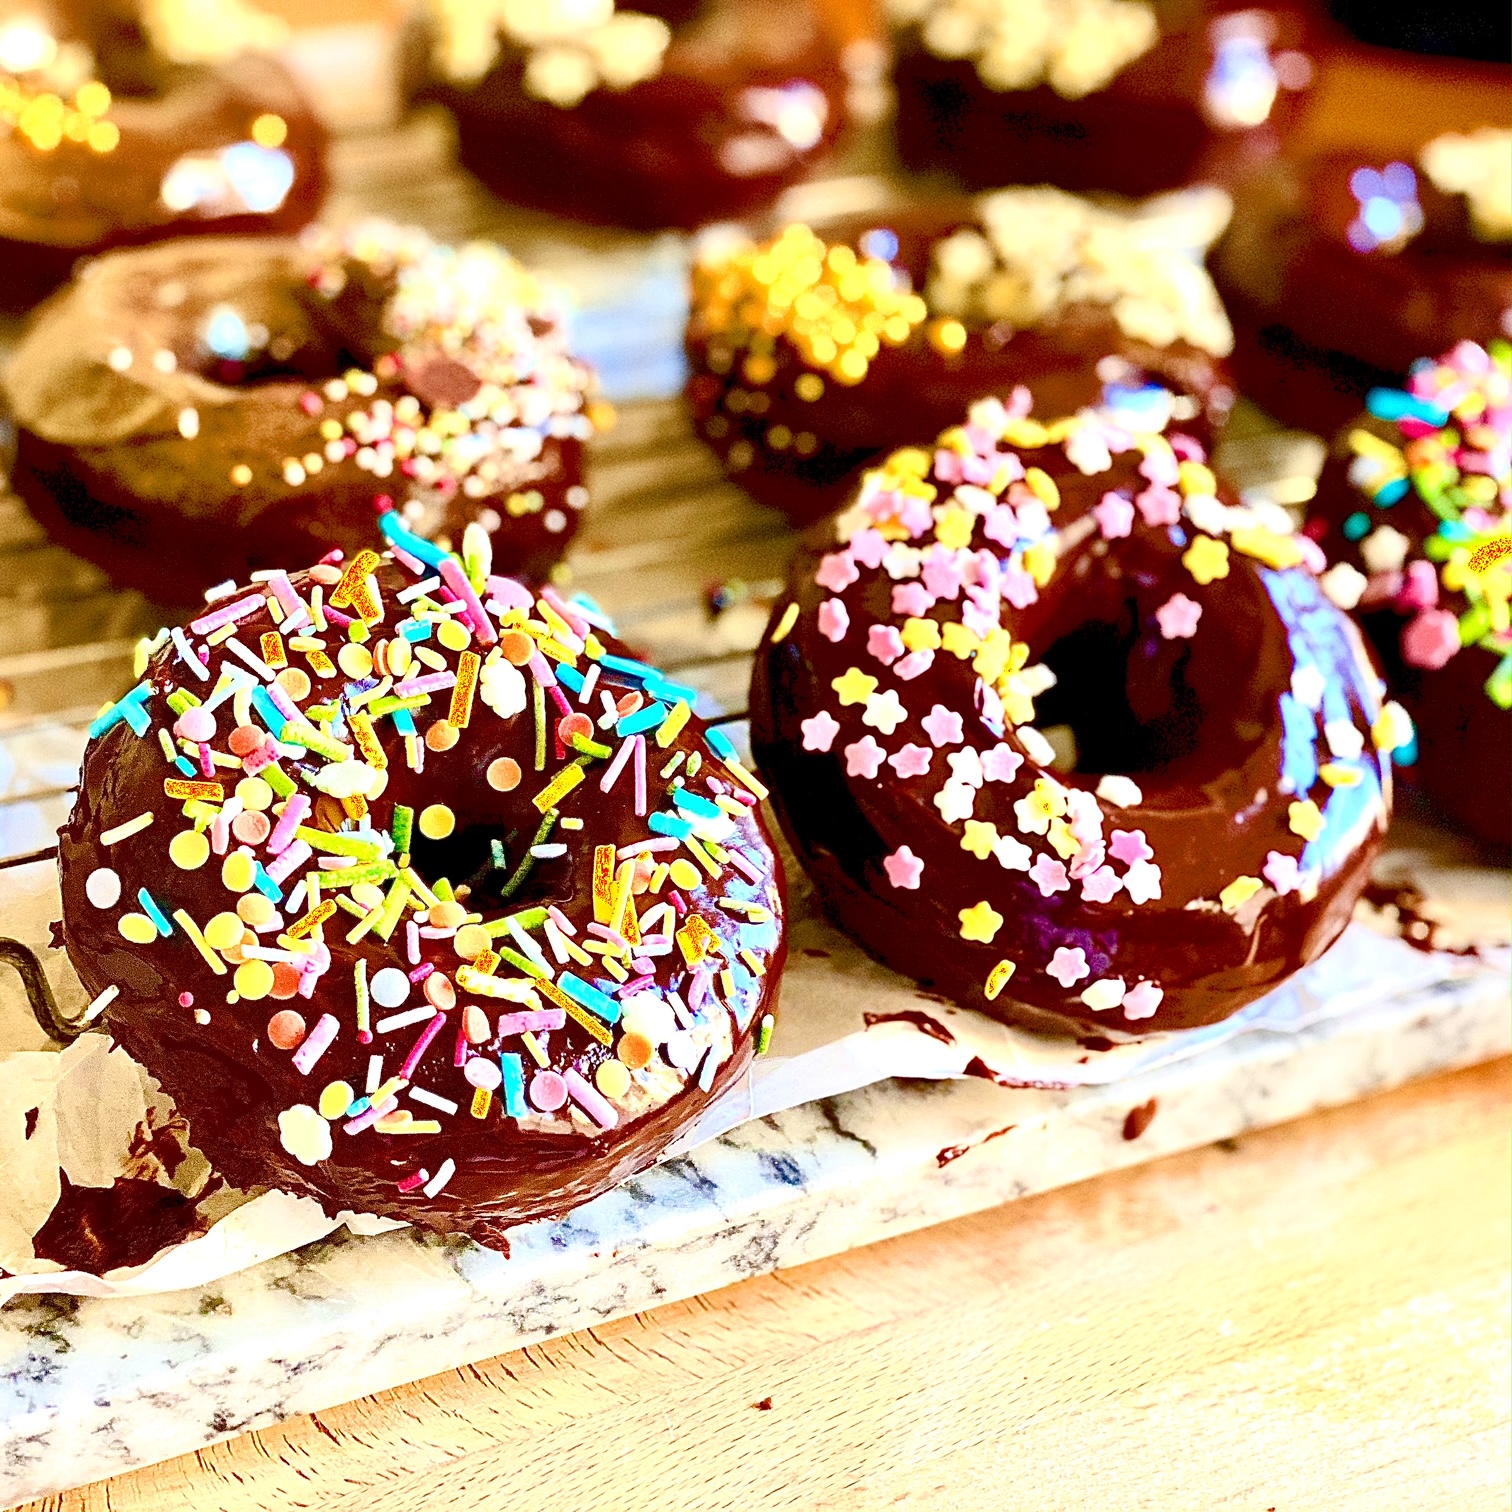 Double Chocolate Baked Doughnuts